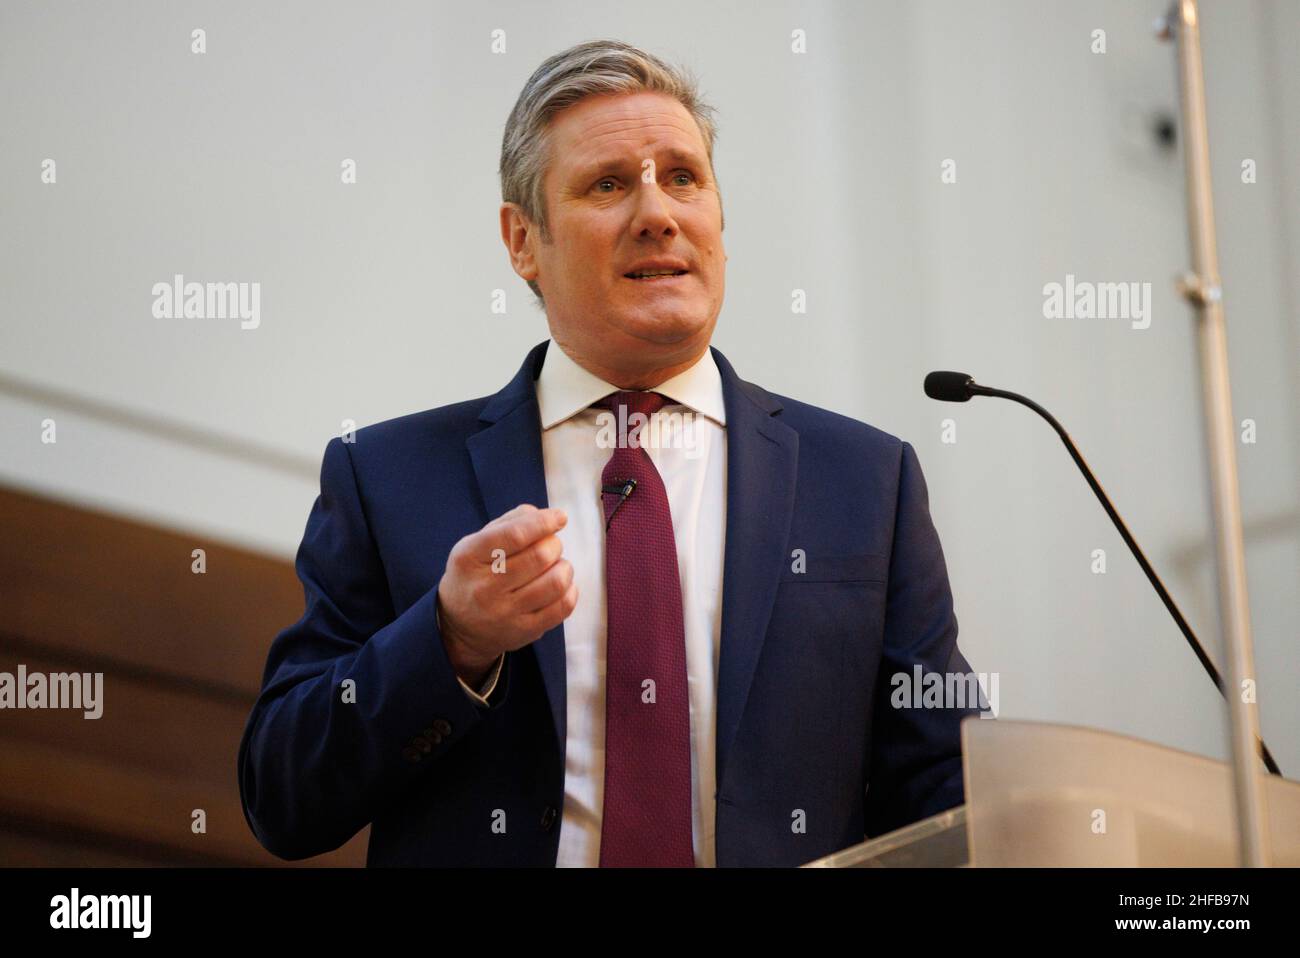 London, UK. 15th Jan, 2022. Labour Leader, Sir Keir Starmer, gives his keynote speech to The Fabian Society. He talked about the parties at Downing Street and pointed the finger at the Prime Minister, Boris Johnson, who admitted being at one of the parties in March 2020. The rest of the country was observing strict lockdown. Credit: Mark Thomas/Alamy Live News Stock Photo